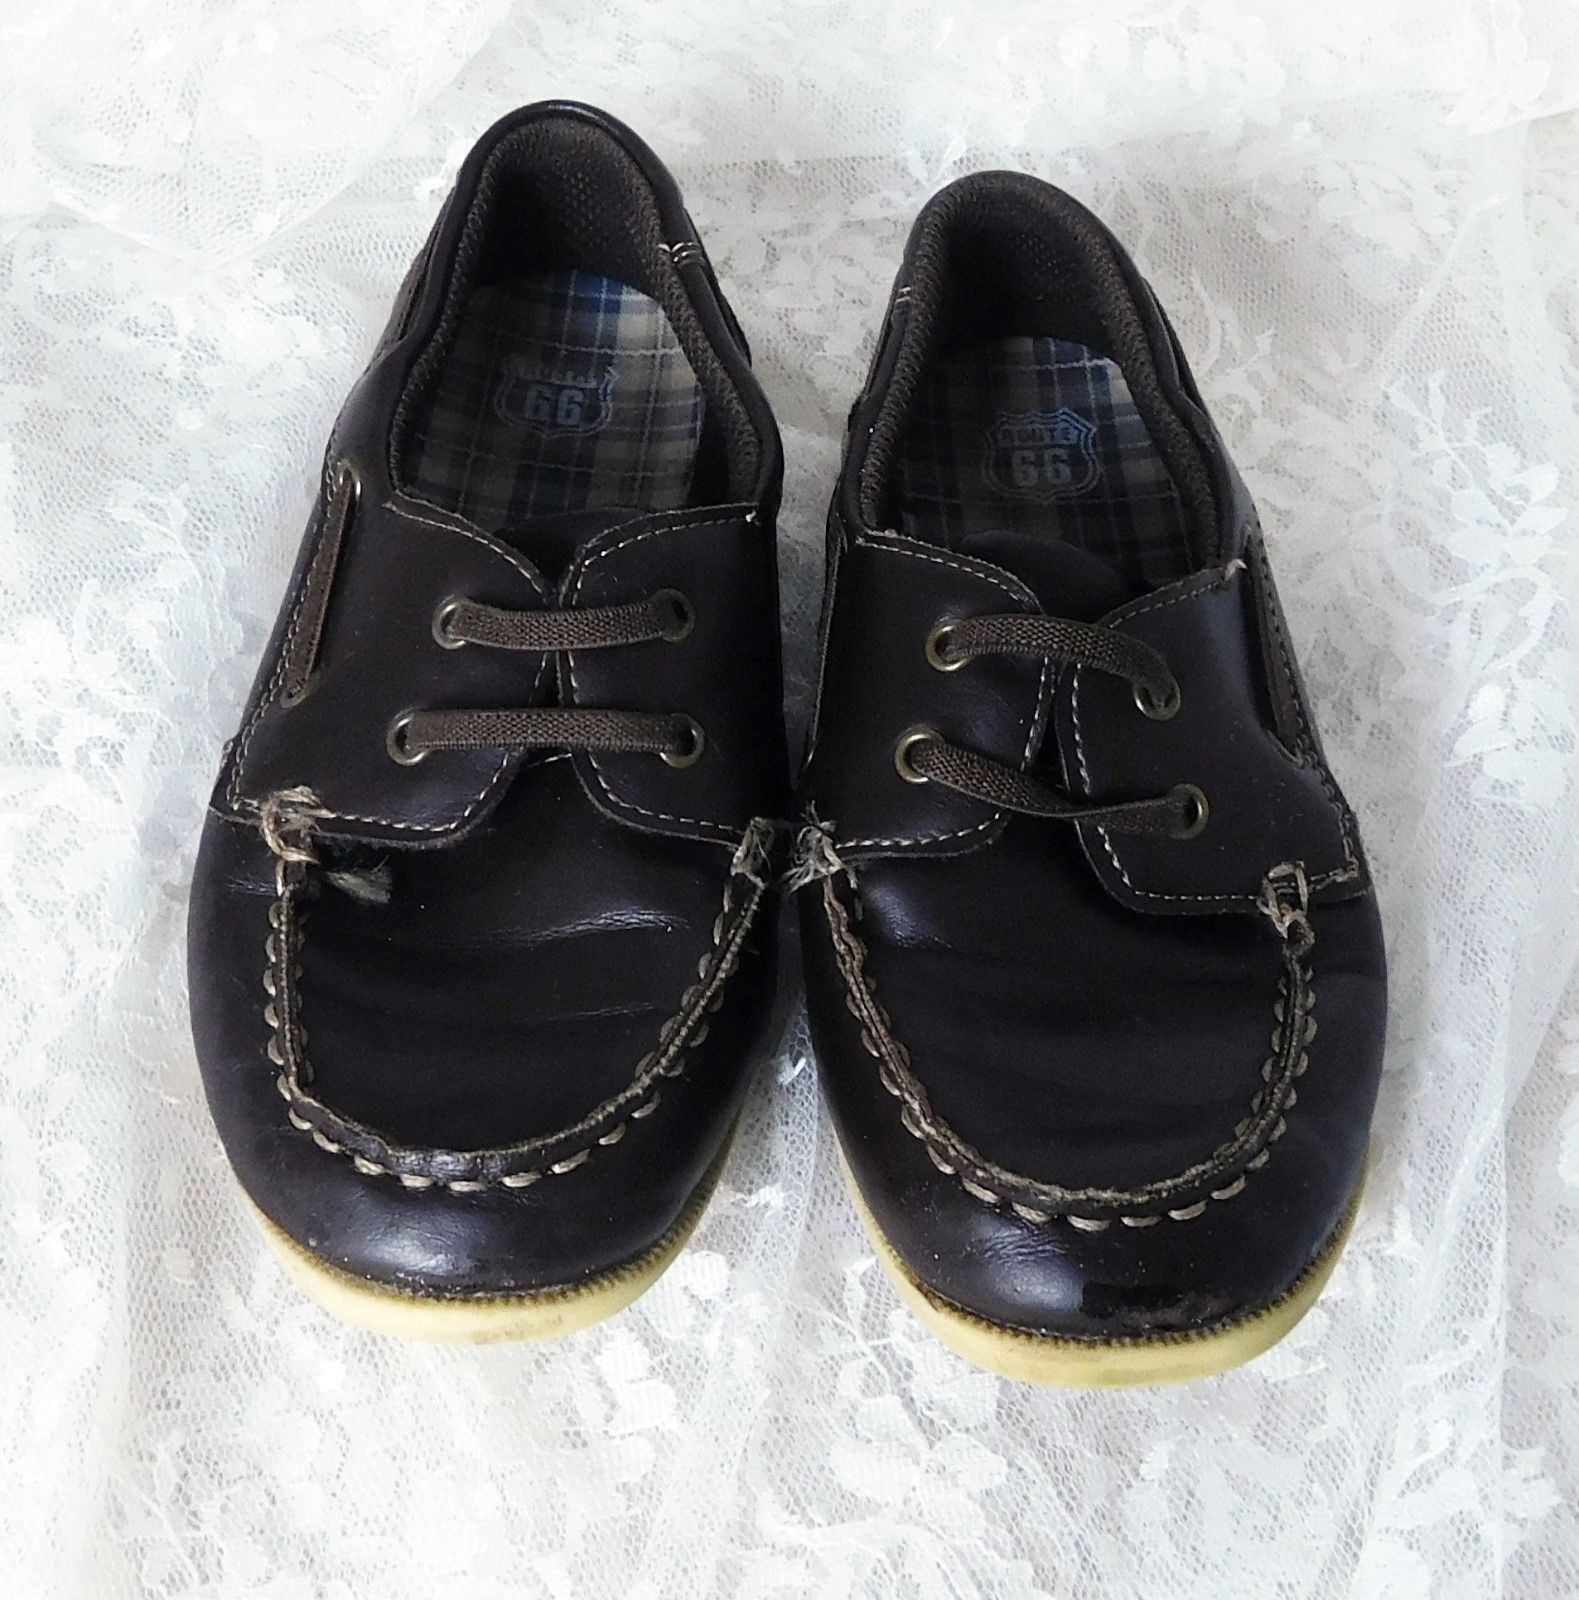 Route 66 Boy's Shoes - Size 12M Brown "Frederic" Boat Style - $9.49